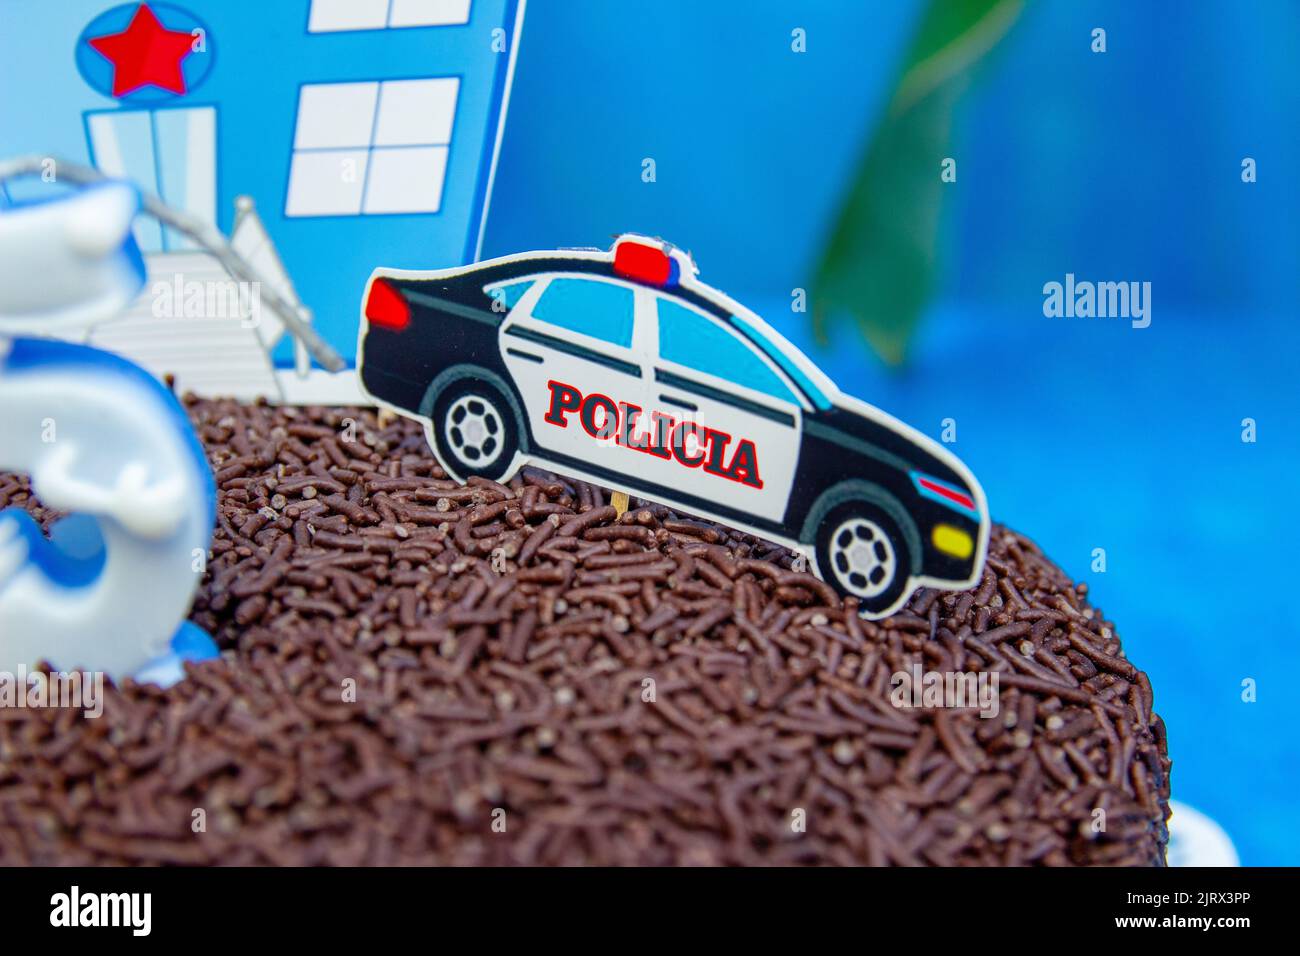 Birthday decoration of 5 years with theme of police, used in a party in Rio de Janeiro. Stock Photo